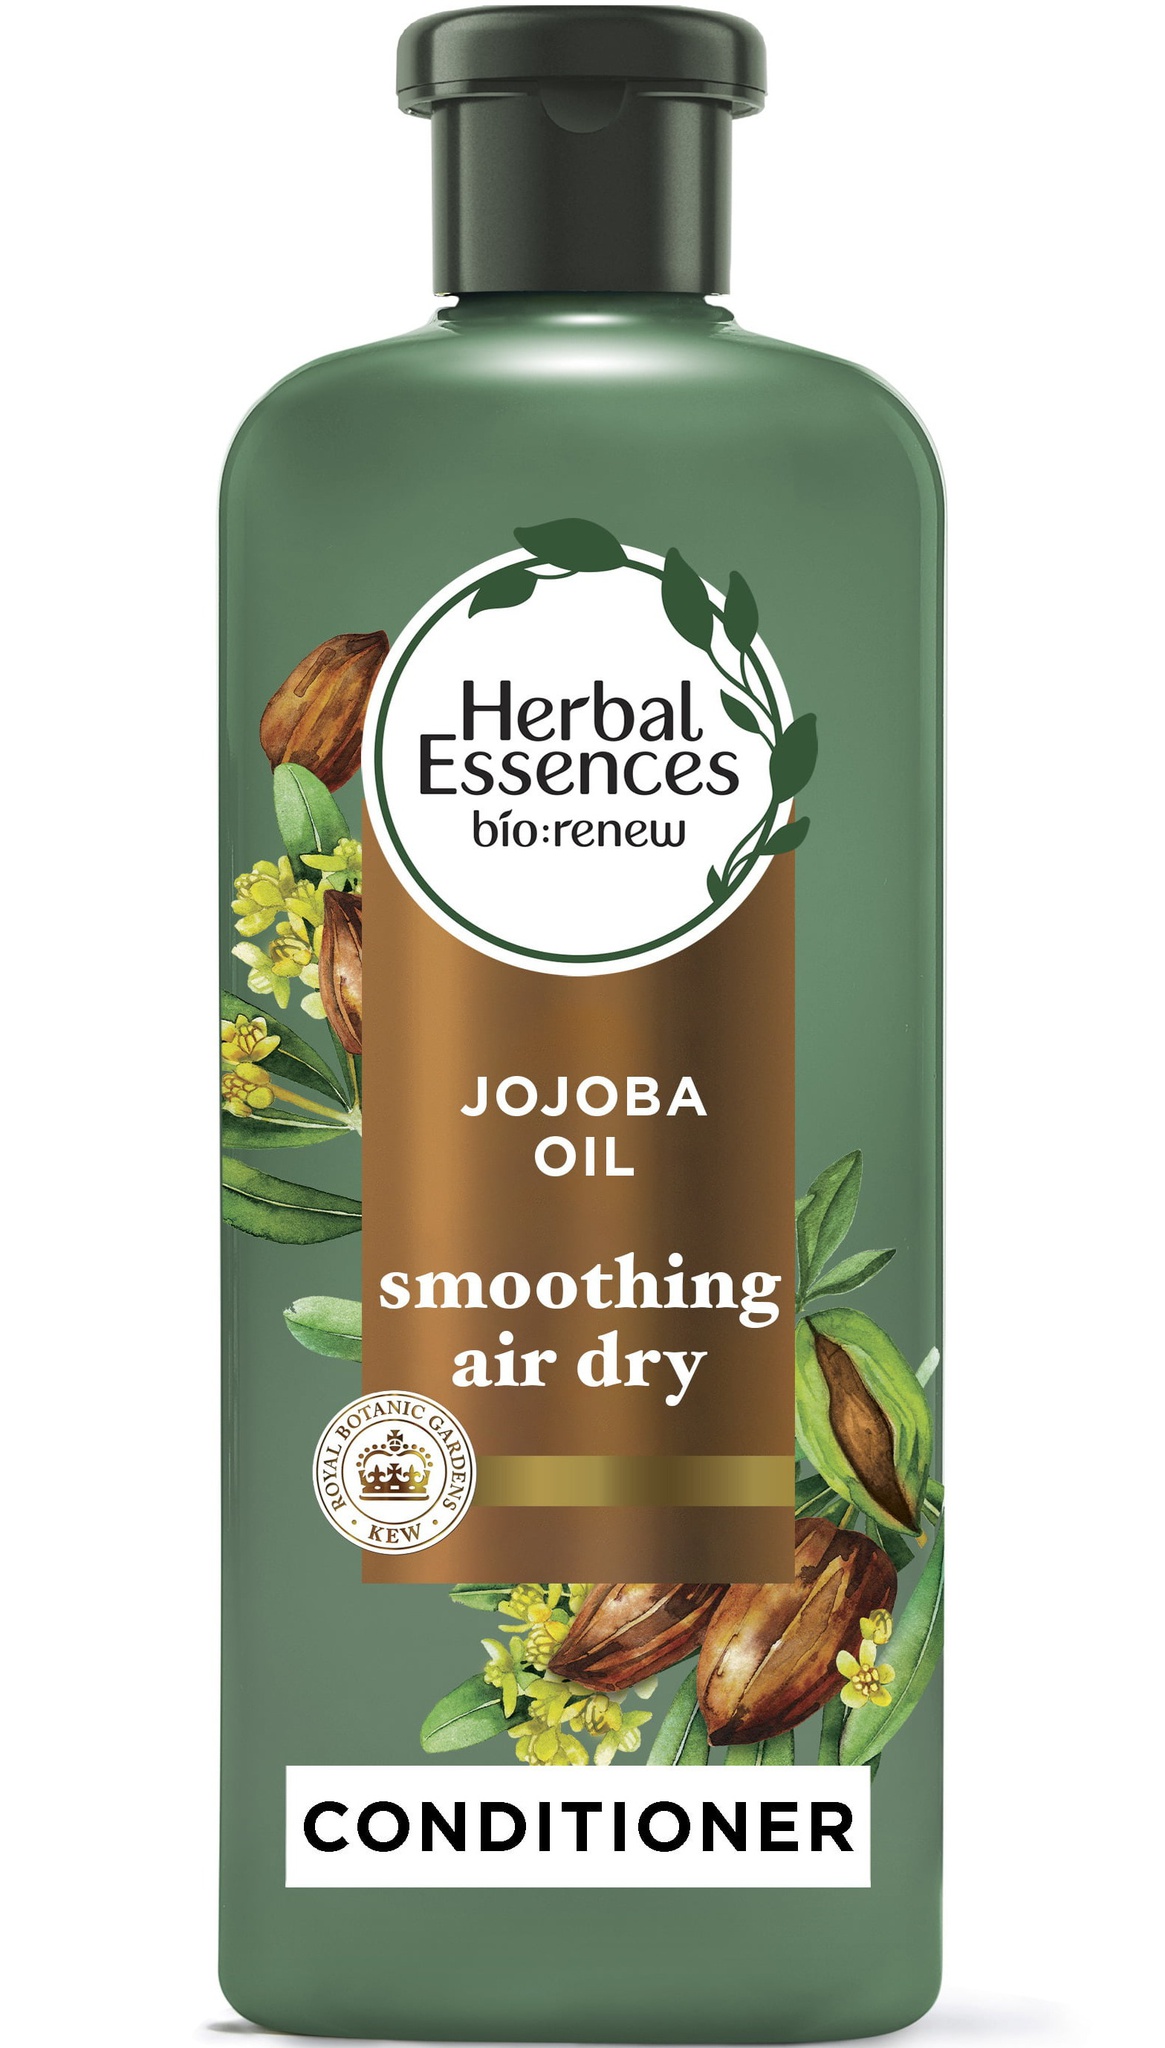 Herbal Essences Sulfate Free Hair Conditioner With Jojoba Oil